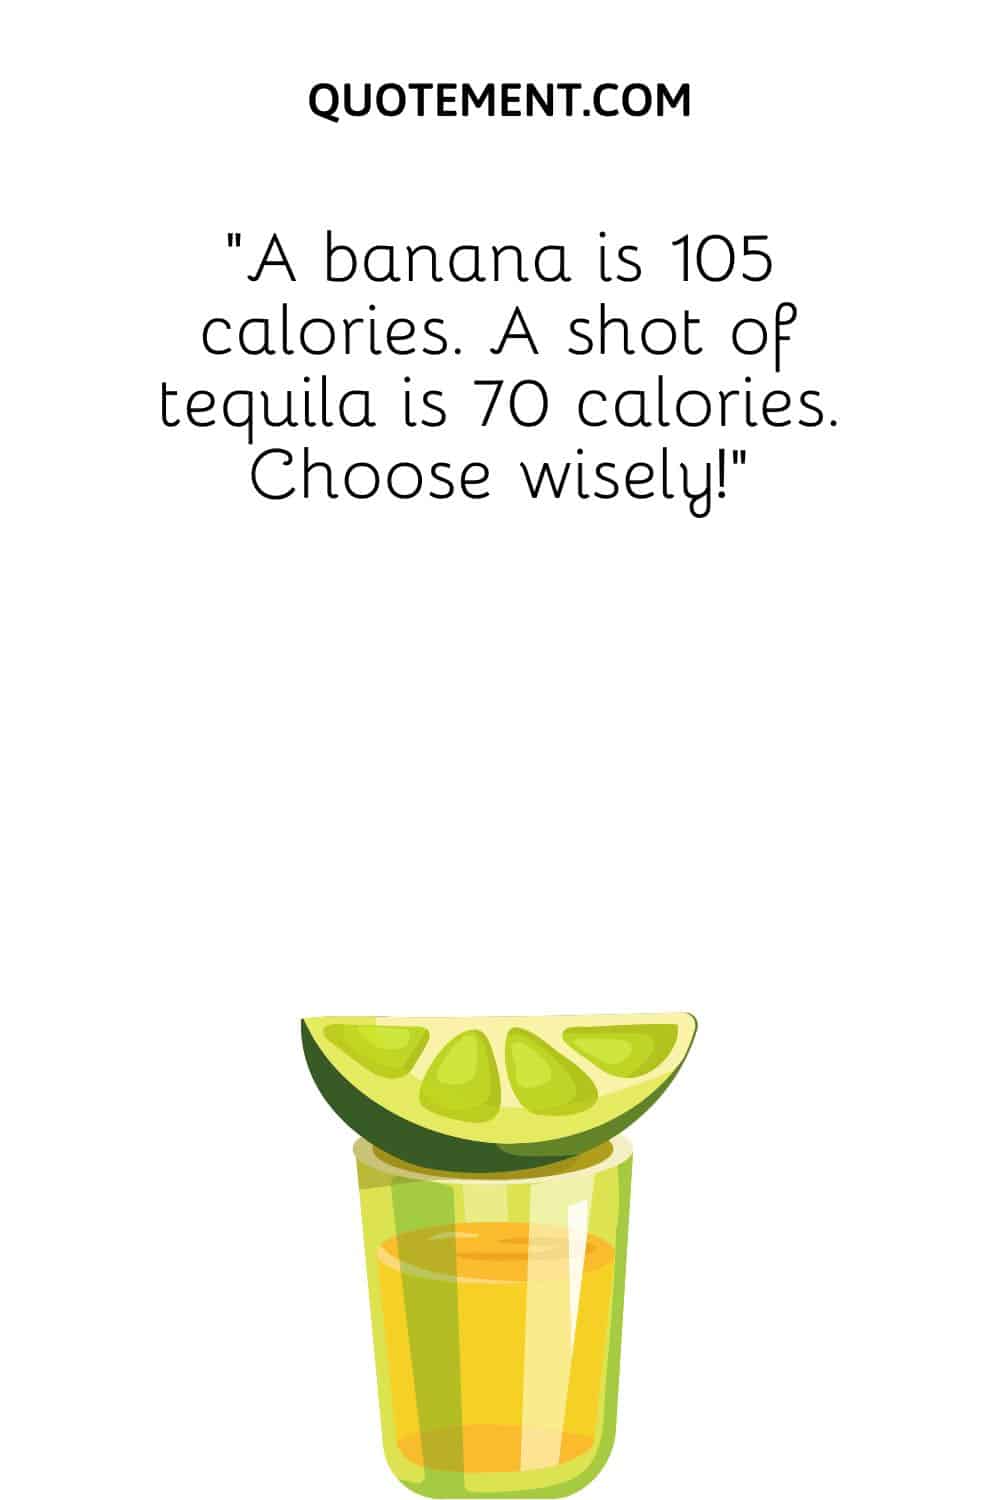 A shot of tequila is 70 calories